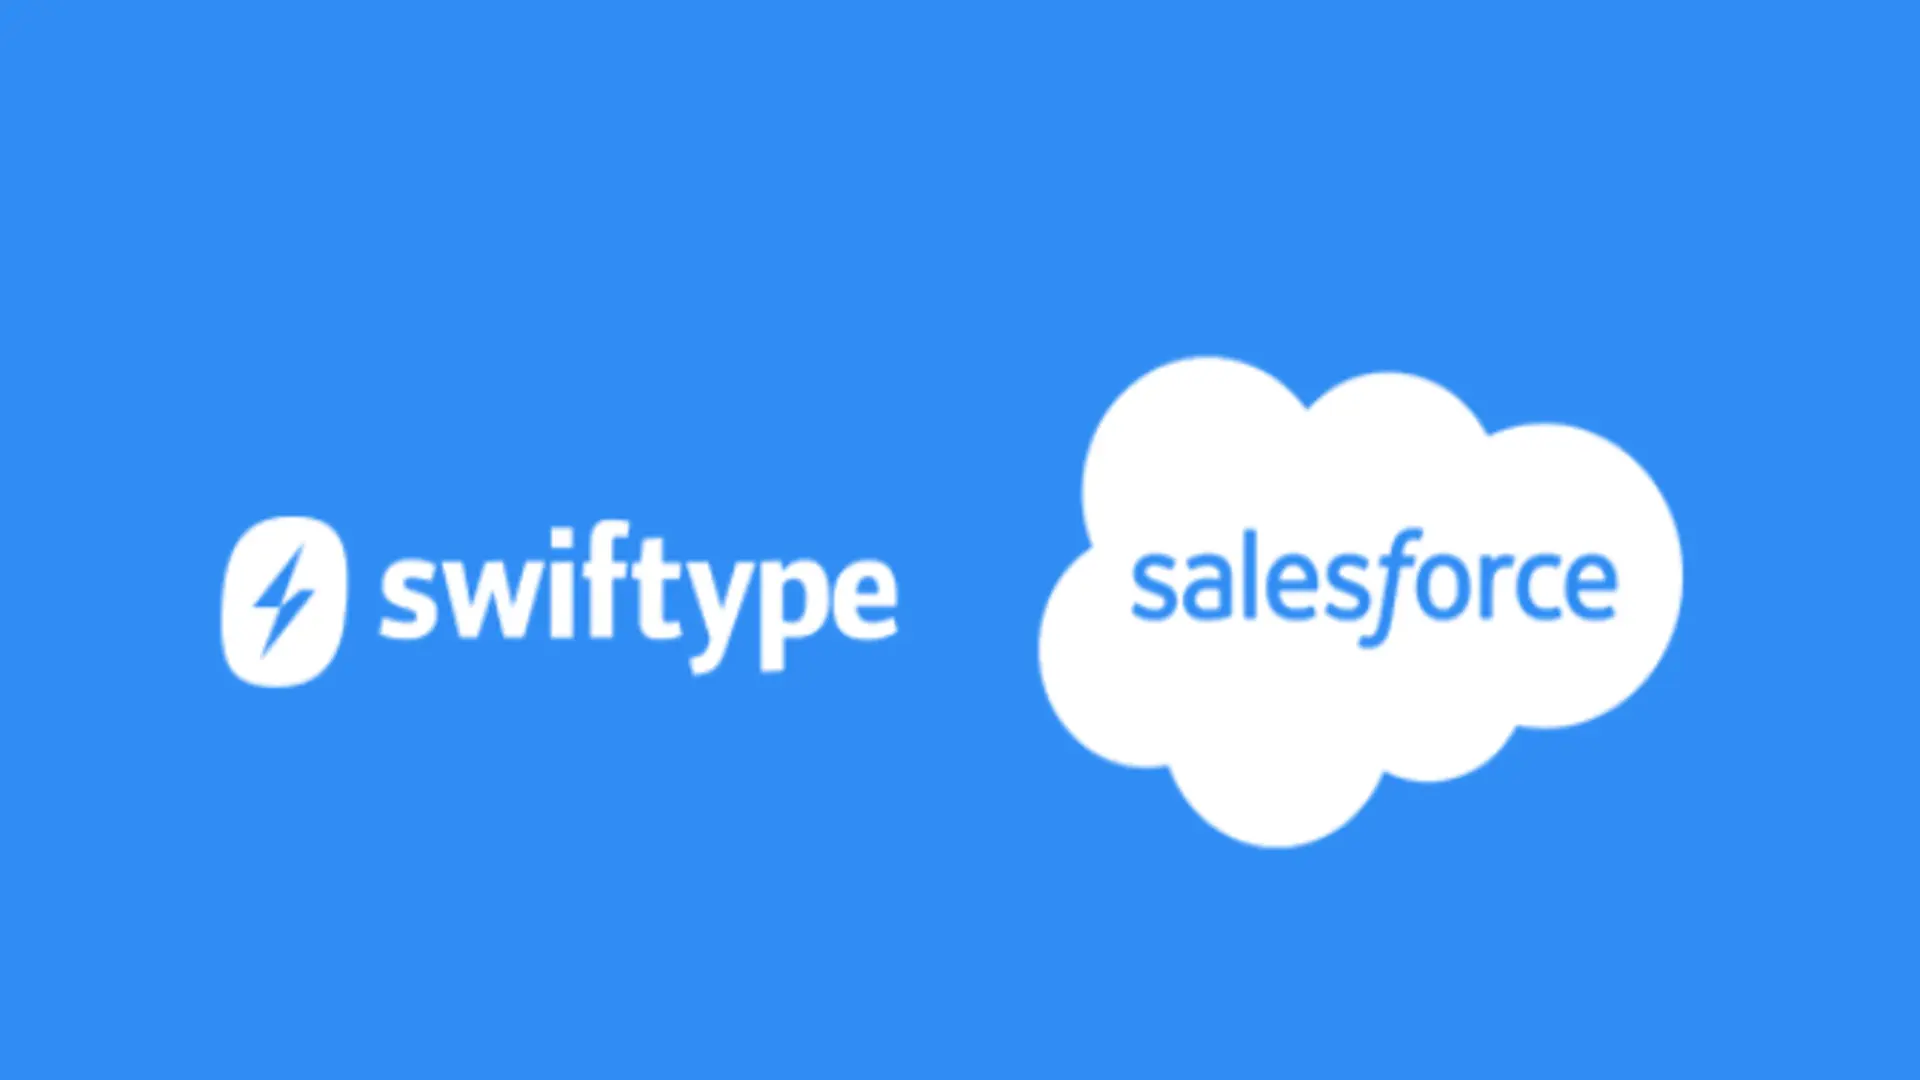 Swiftype Launches New Product For Salesforce Federated Search